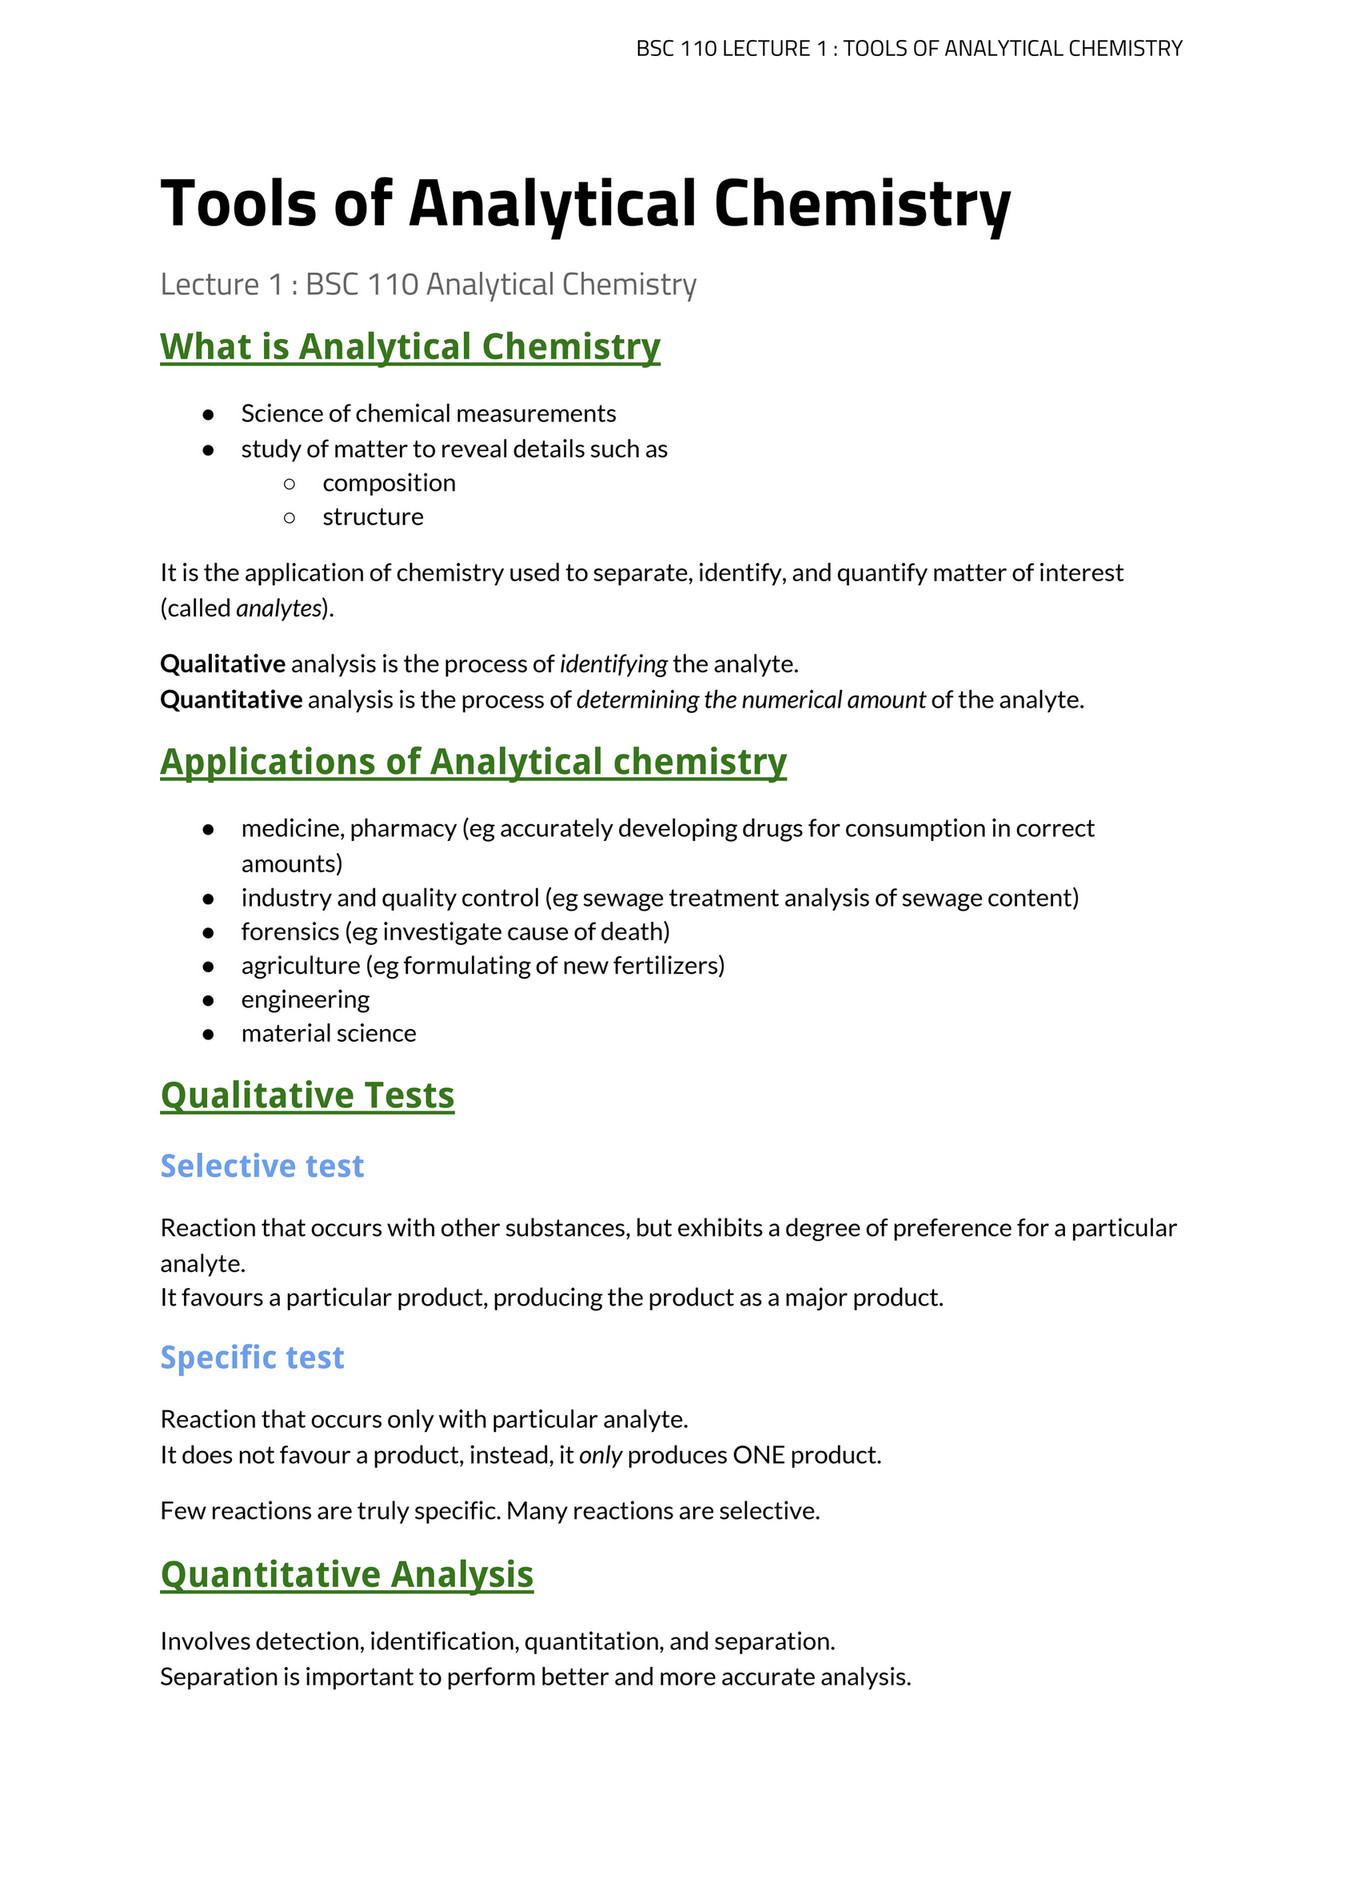 research papers on analytical chemistry